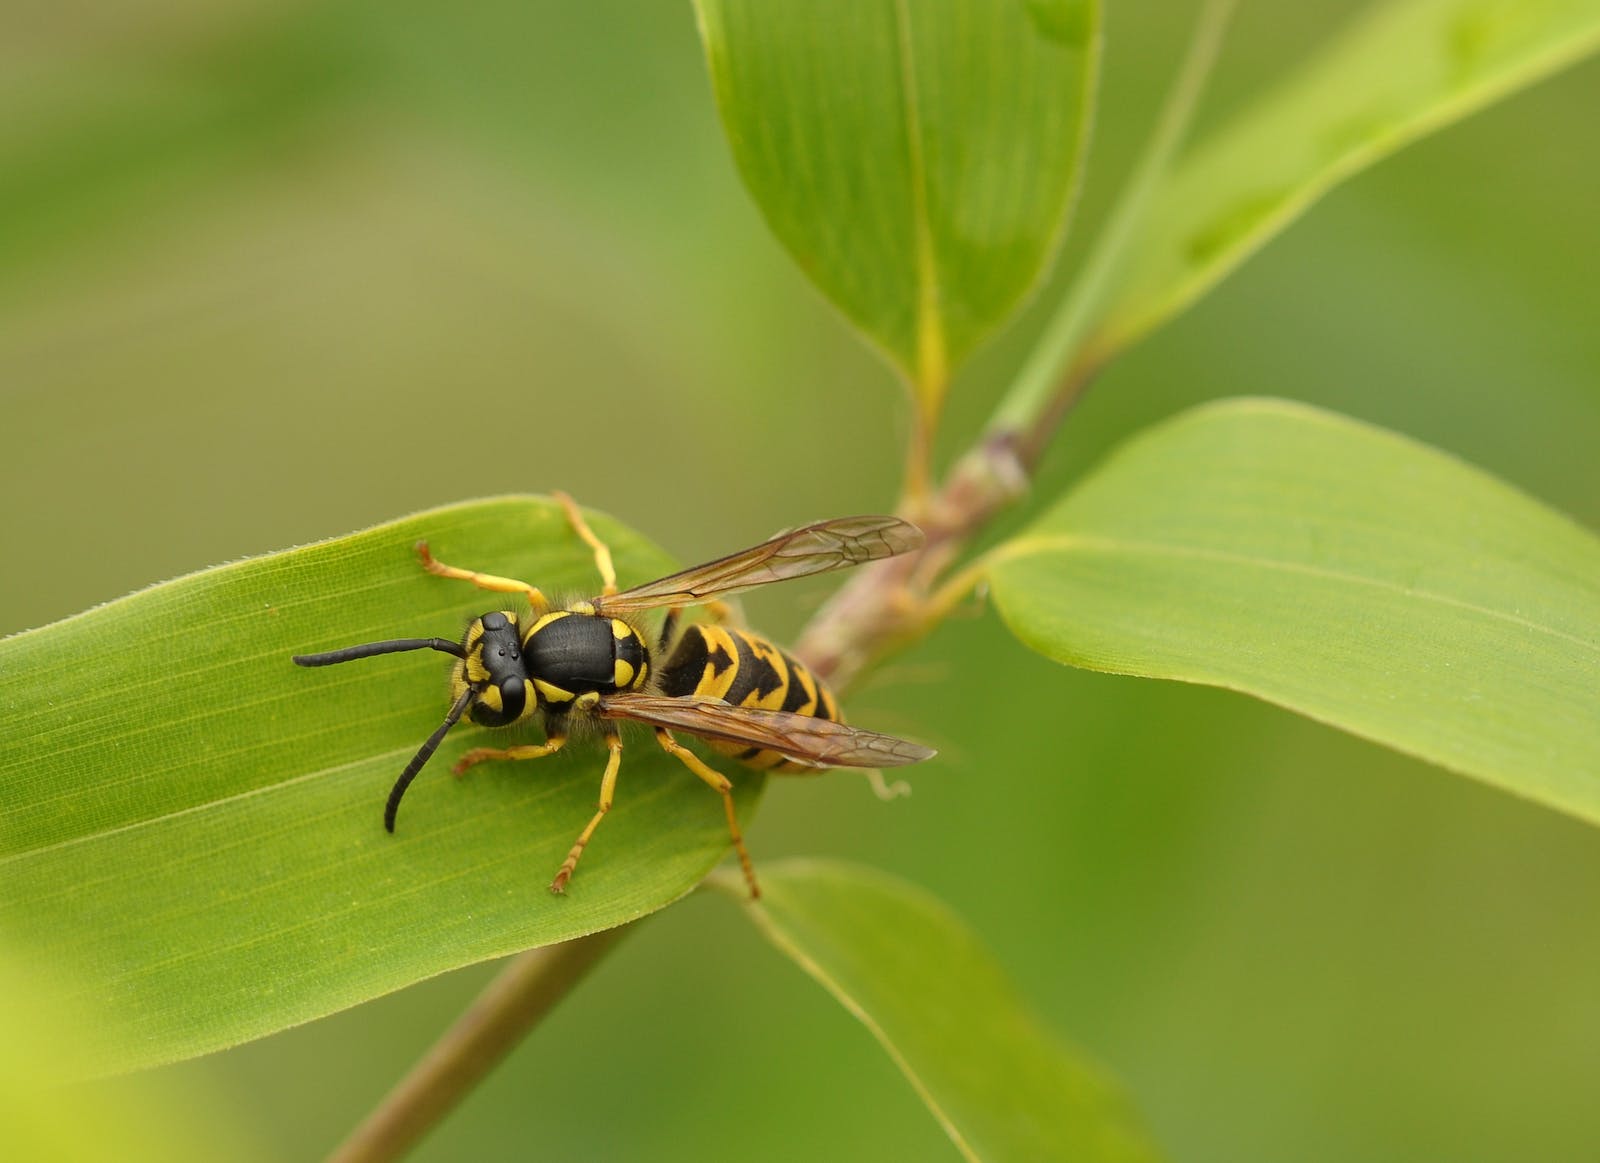 Close-up Photo of Yellowjacket Wasp on Green Leaf